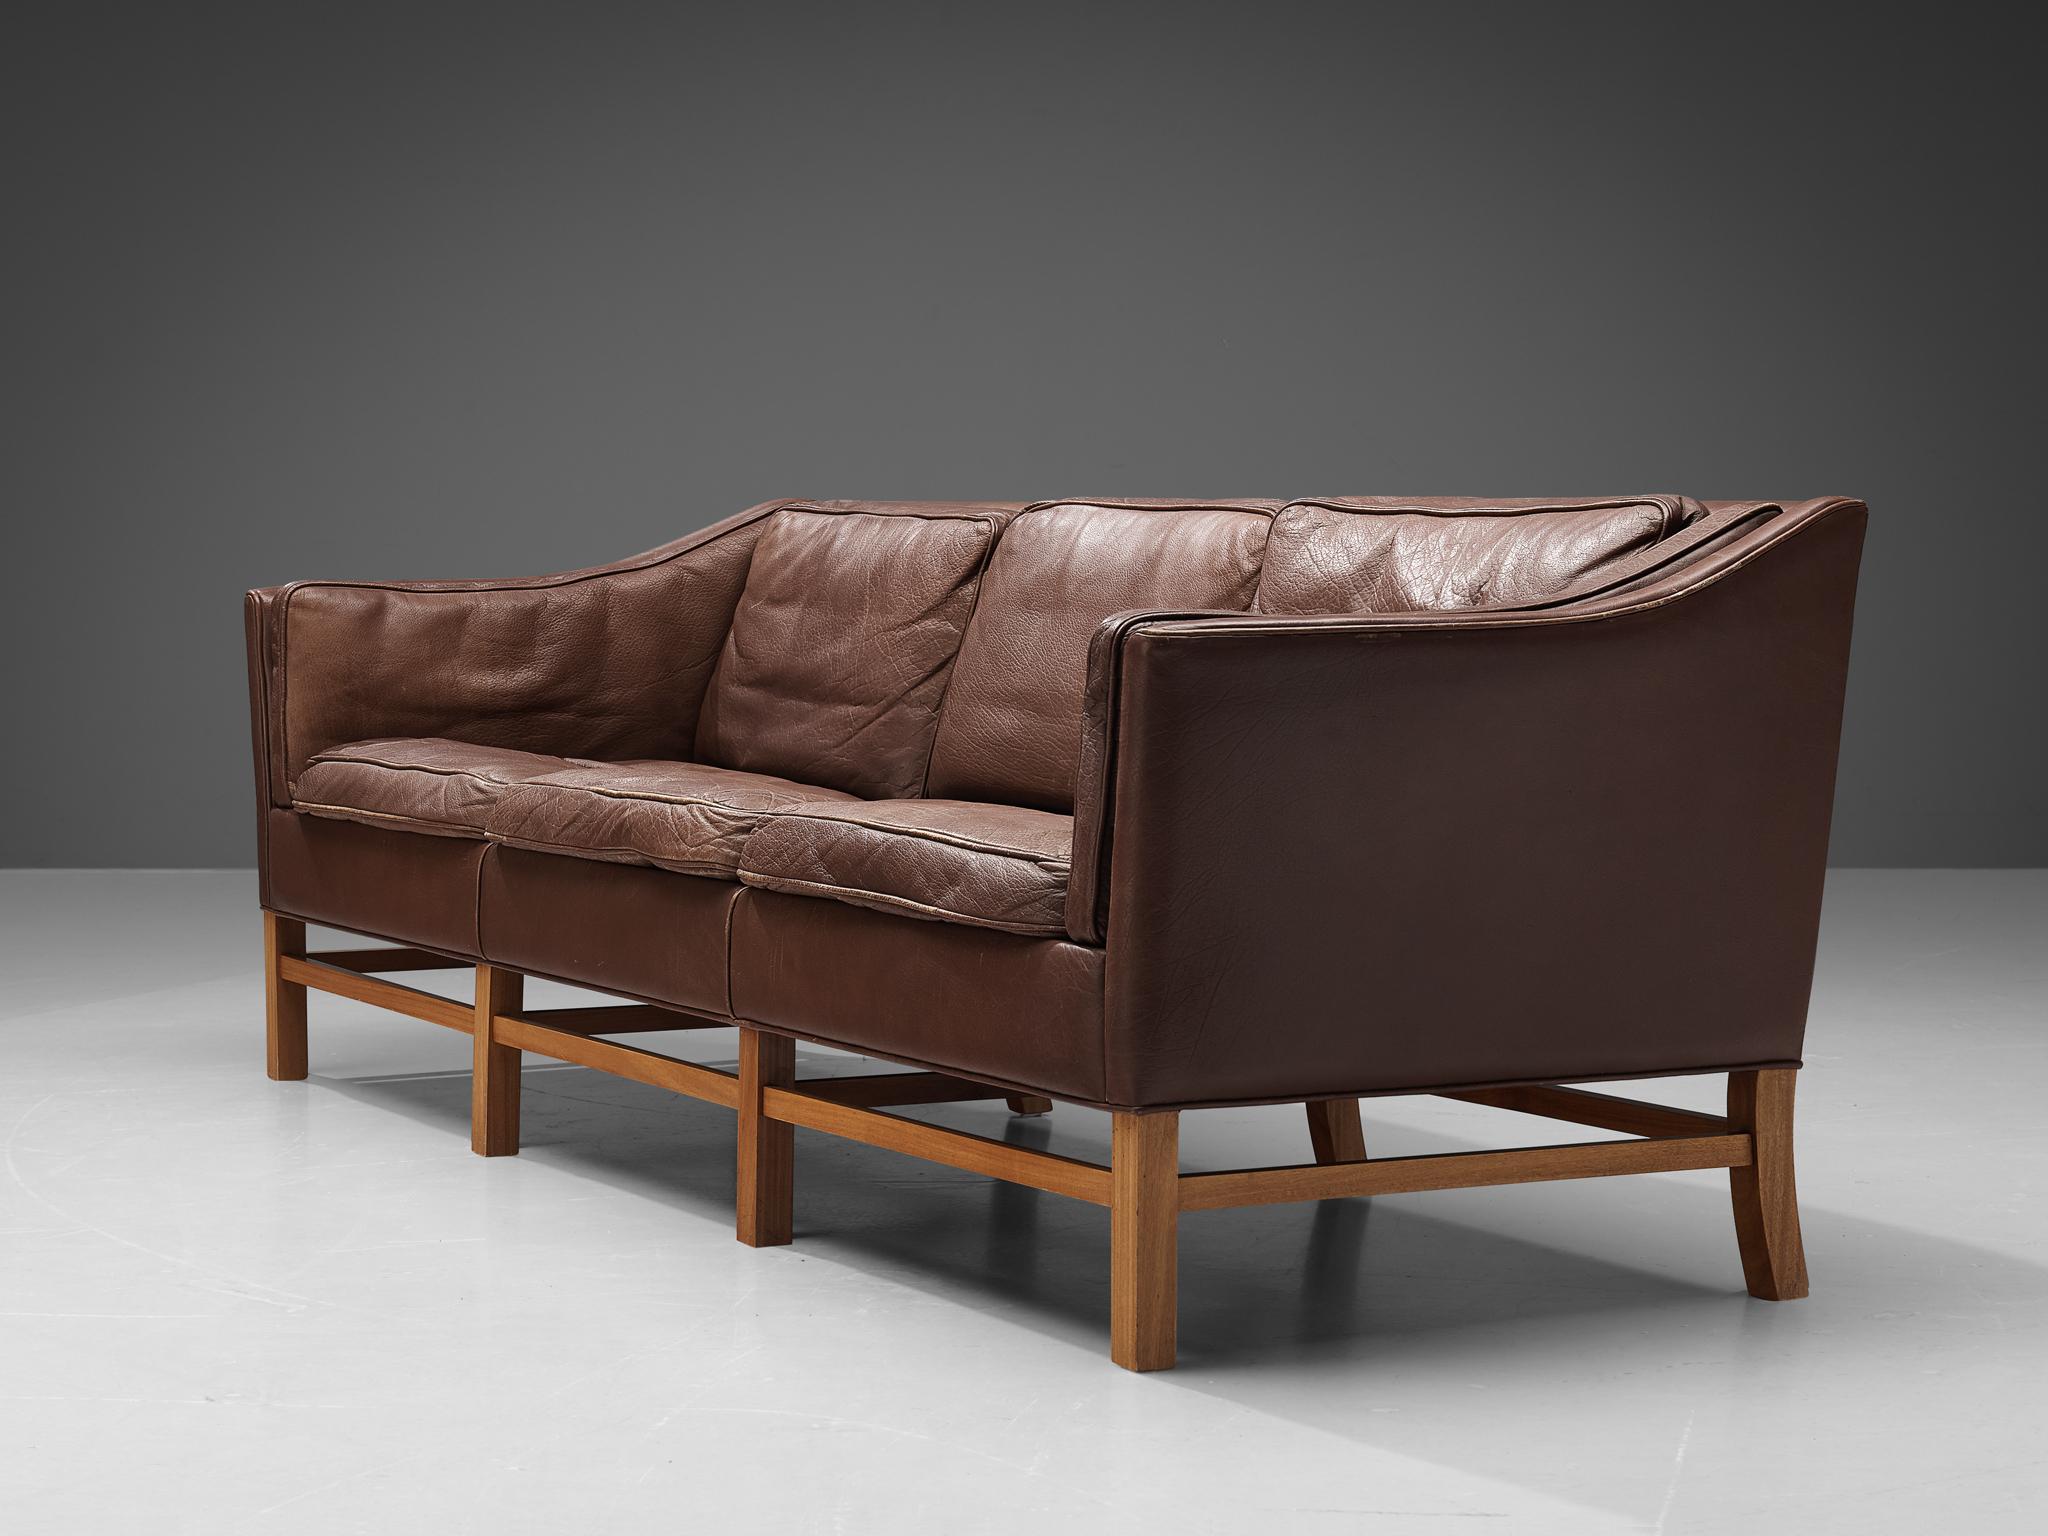 Mid-20th Century Danish Three Seat Sofa in Umber Leather and Mahogany For Sale